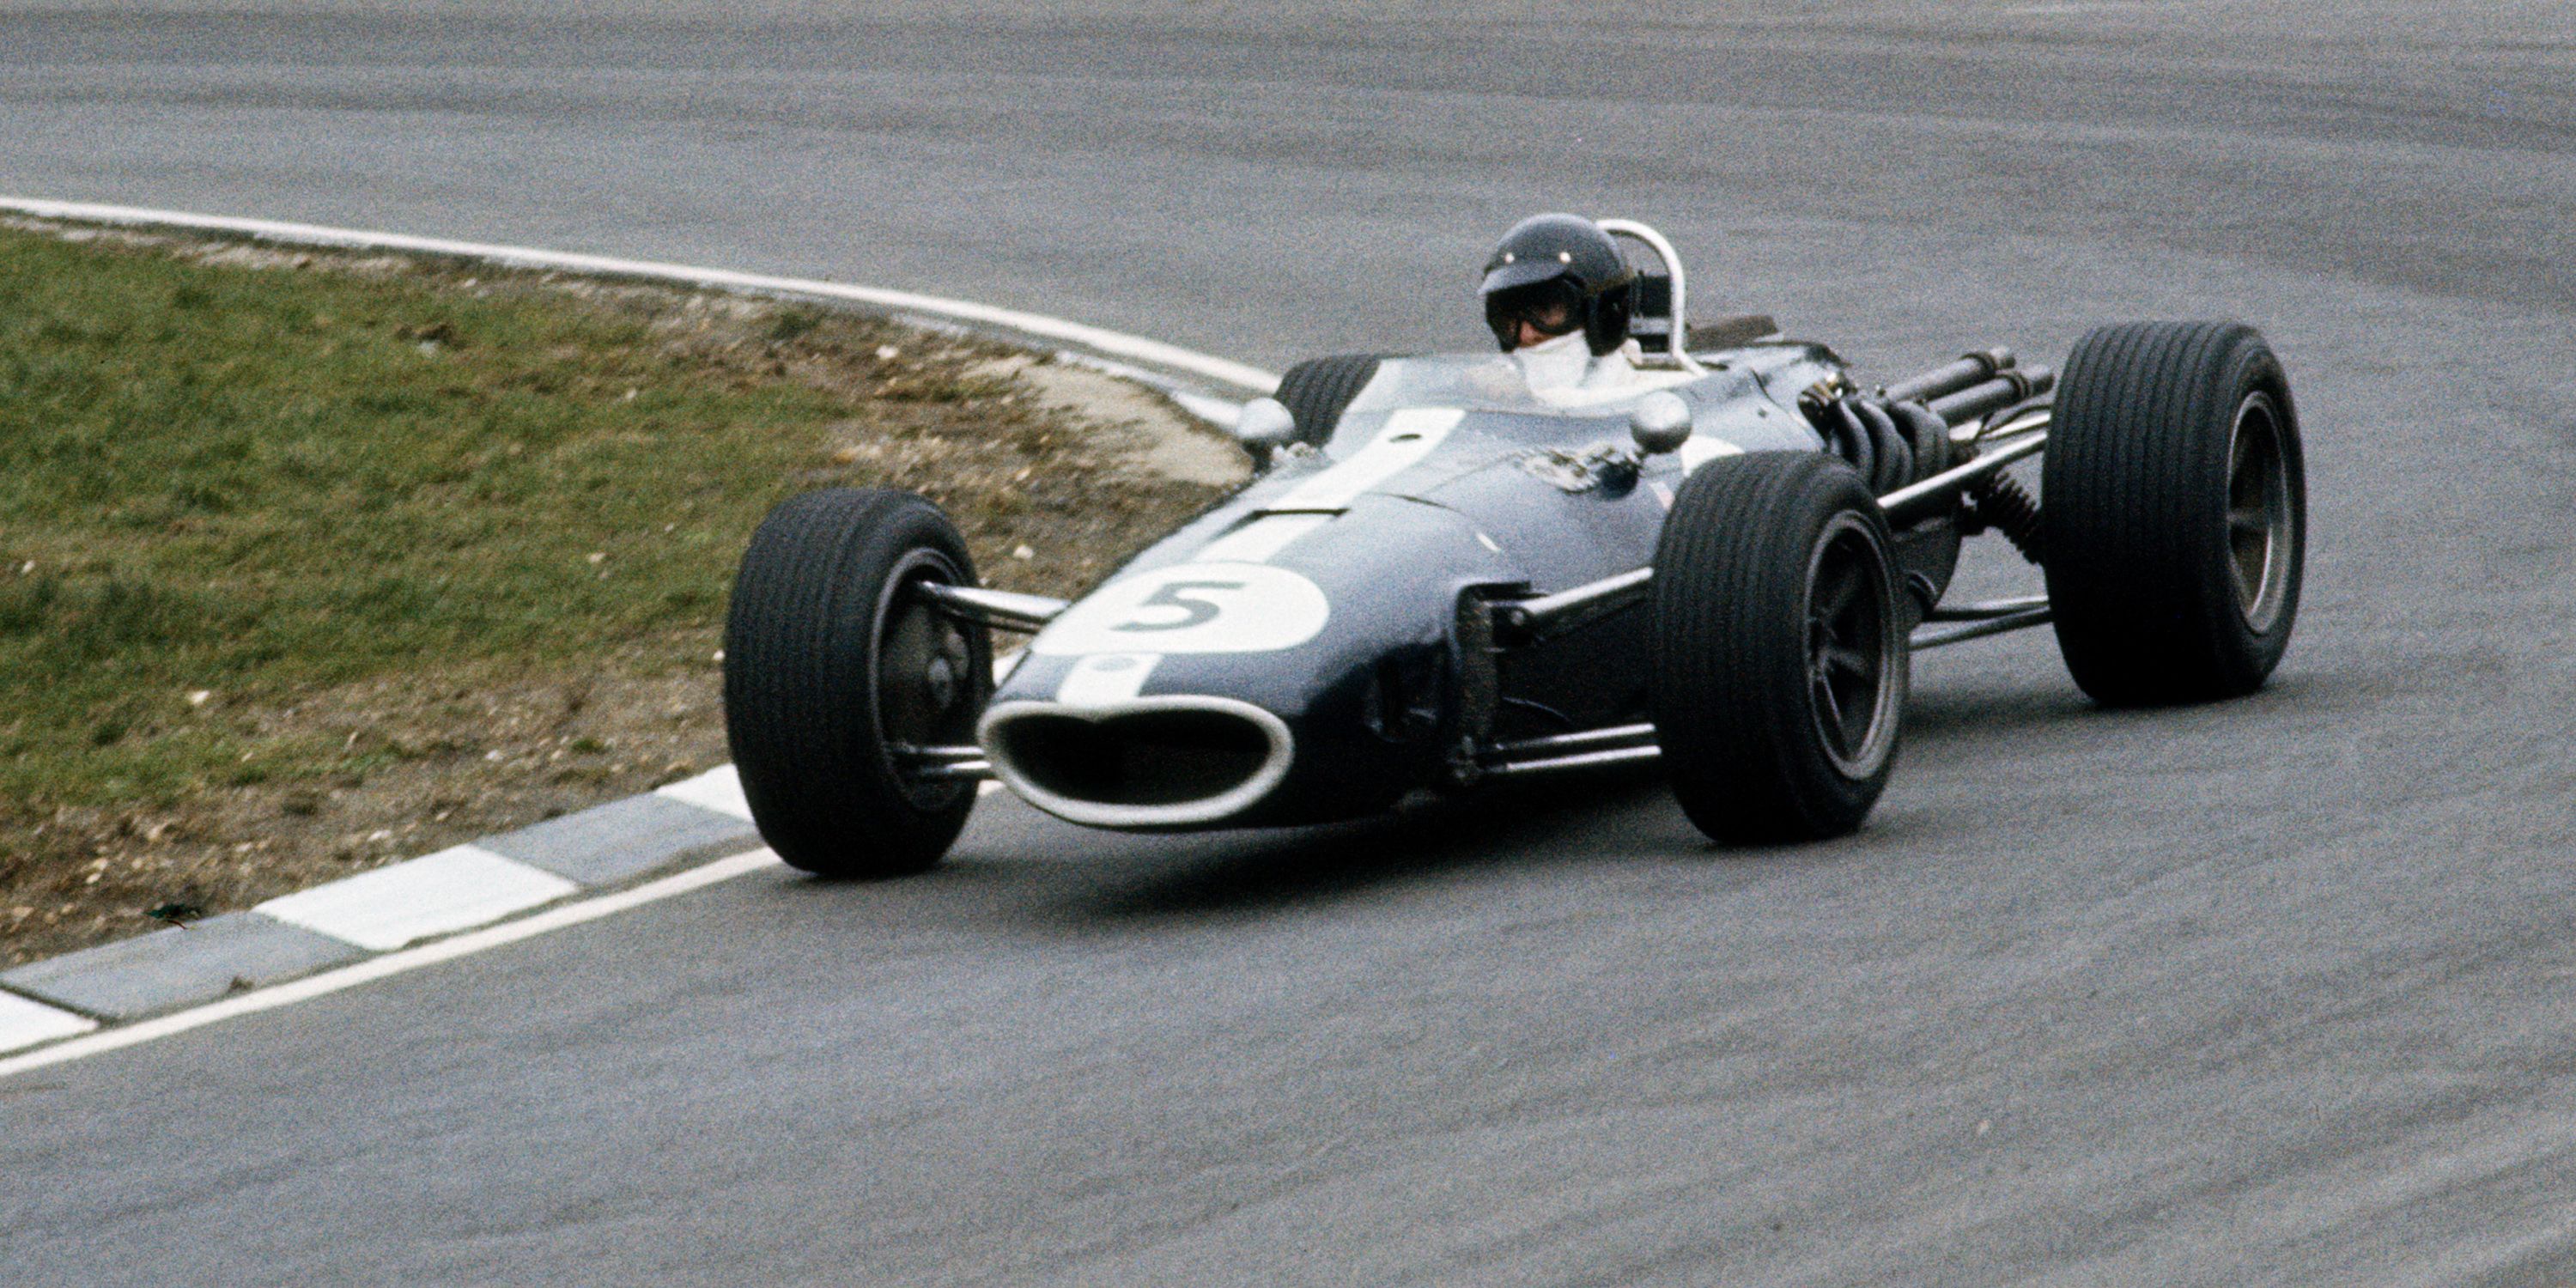 The 10 Best American Race Cars In History